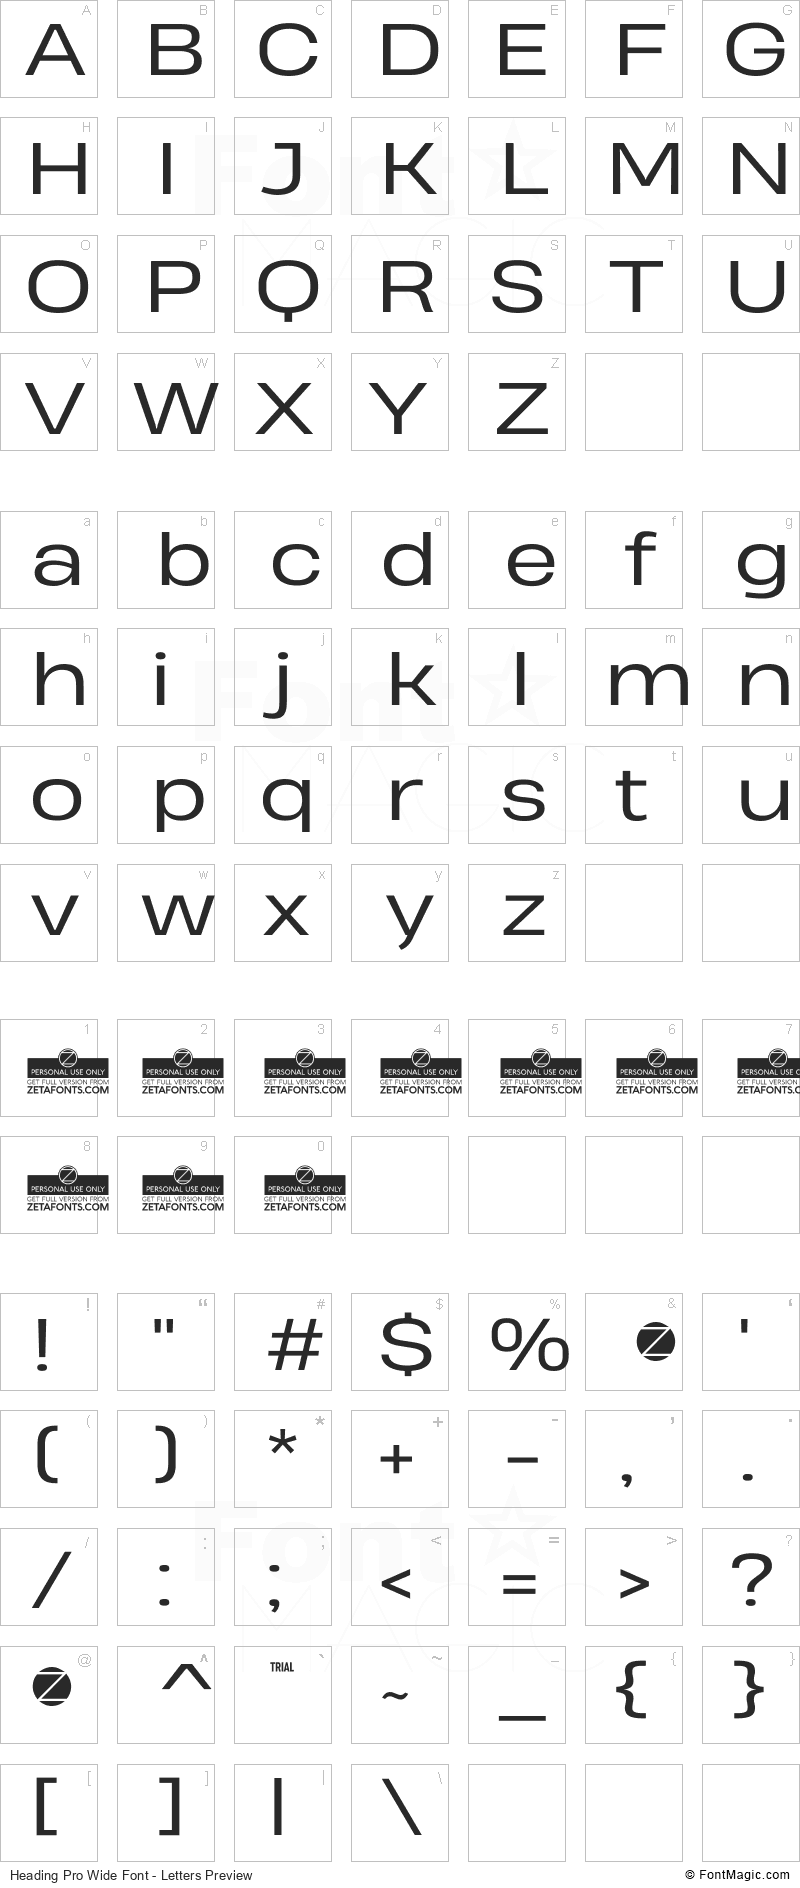 Heading Pro Wide Font - All Latters Preview Chart